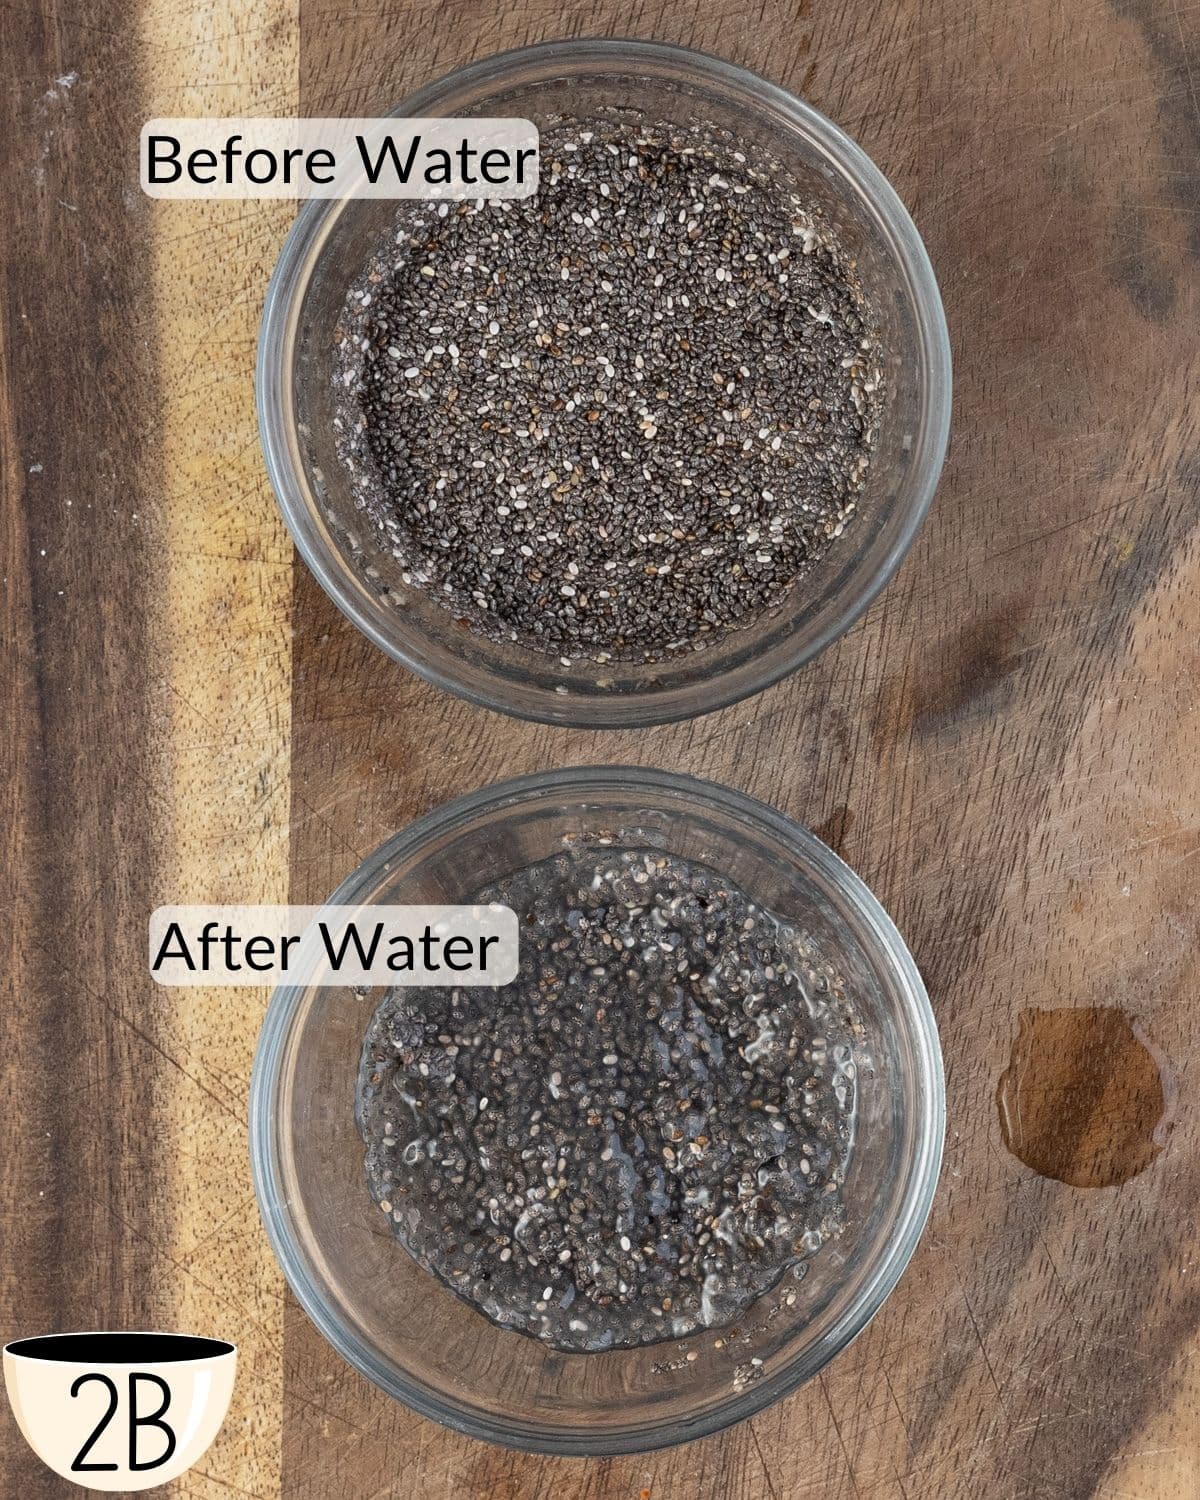 A bowl of dry chia seeds compared side by side with the same bowl after water has been added, showing the seeds' absorption for muffin preparation.